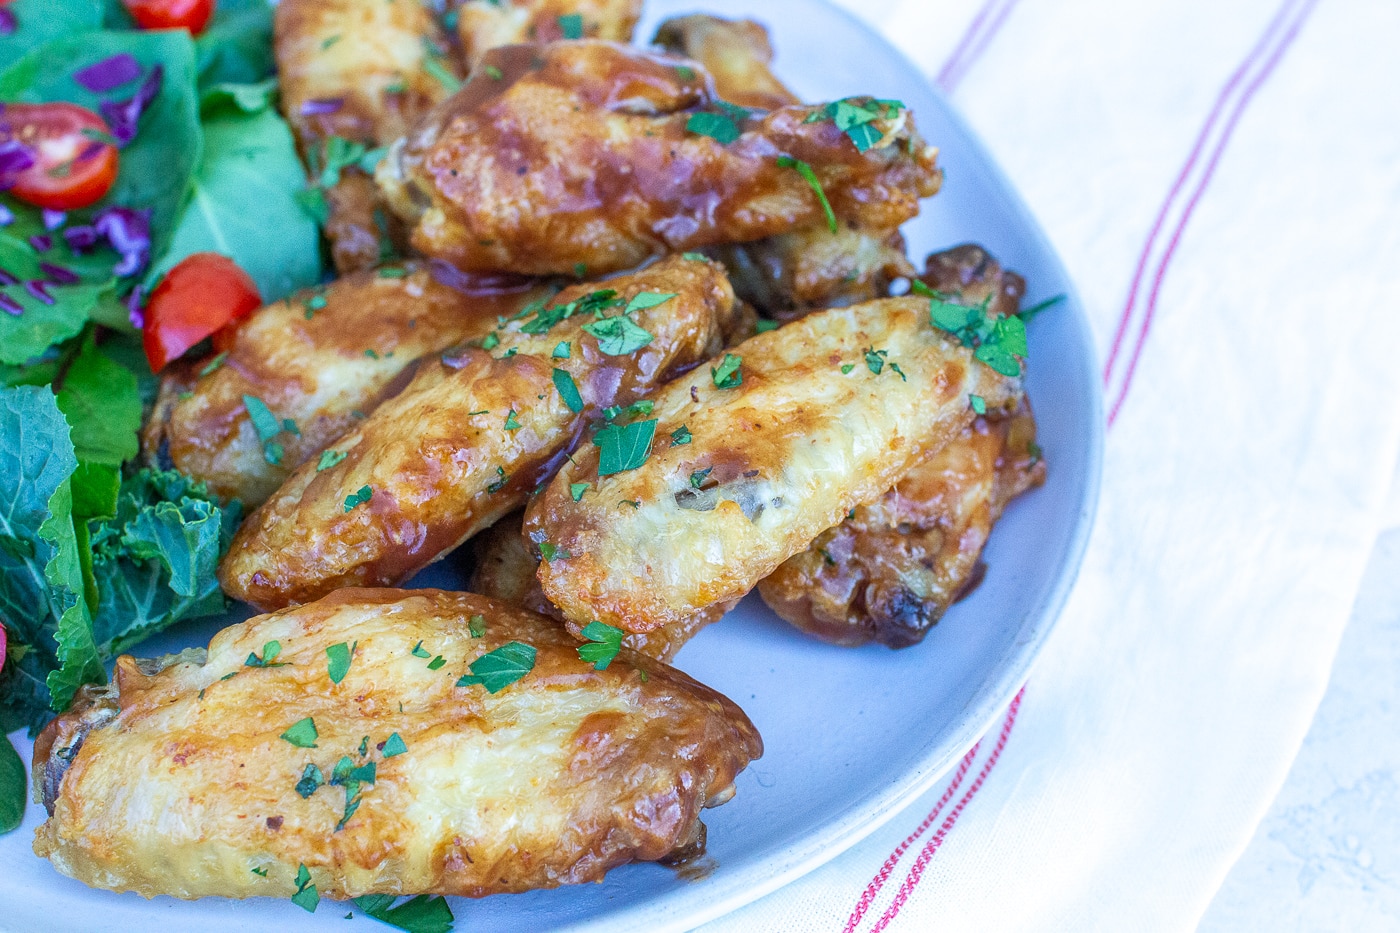 brown glazed chicken wing pieces sprinkled with chopped green herbs aside a green salad